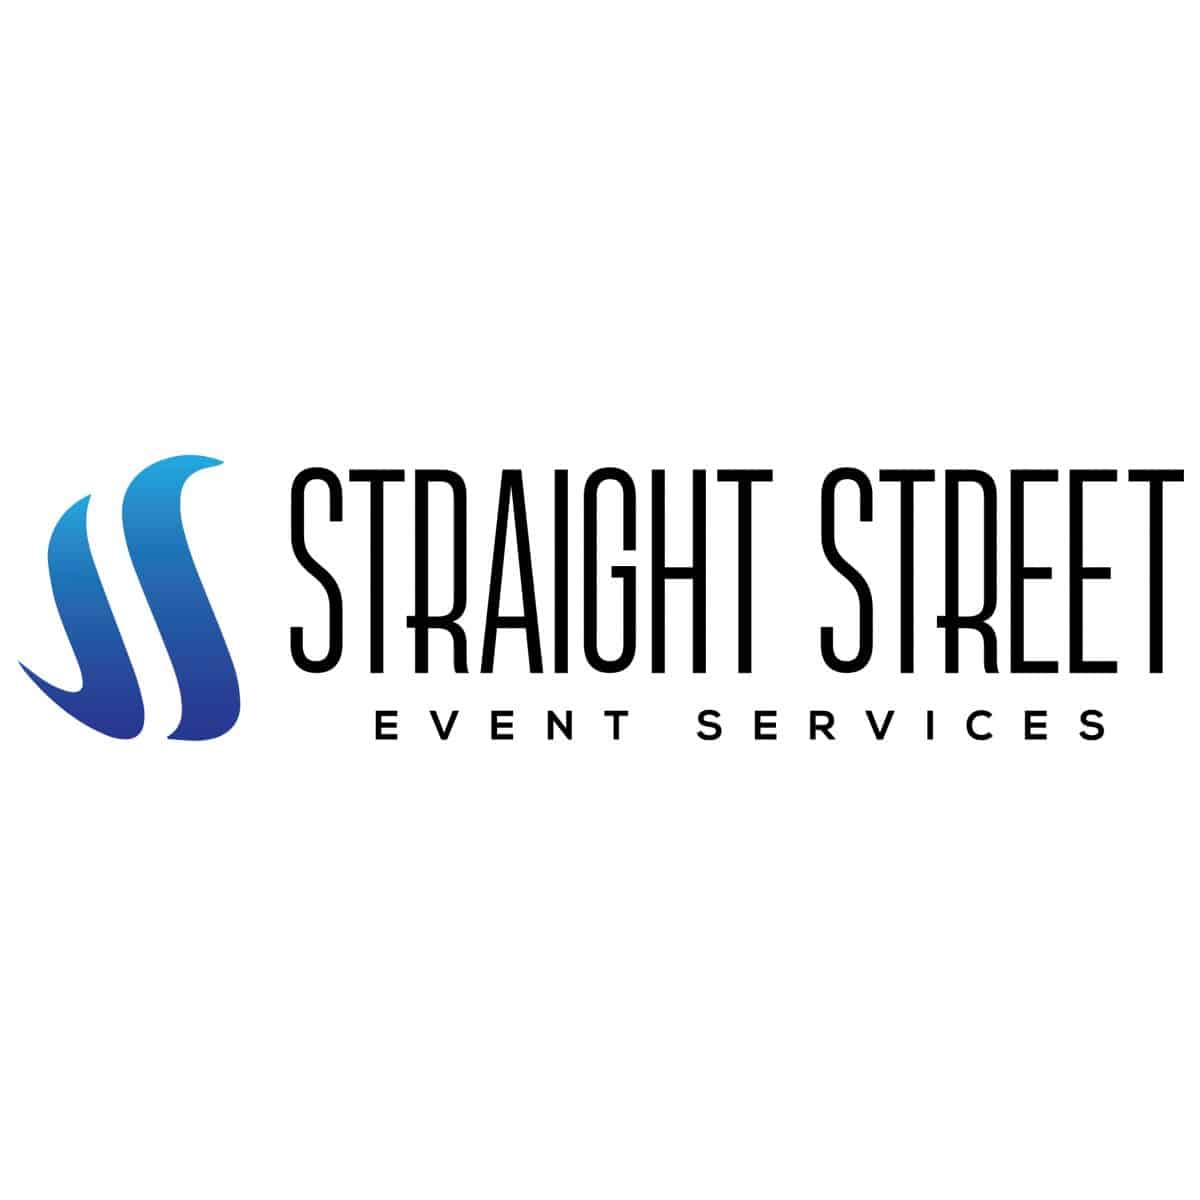 Announcing our new brand identity! - Straight Street Event Services